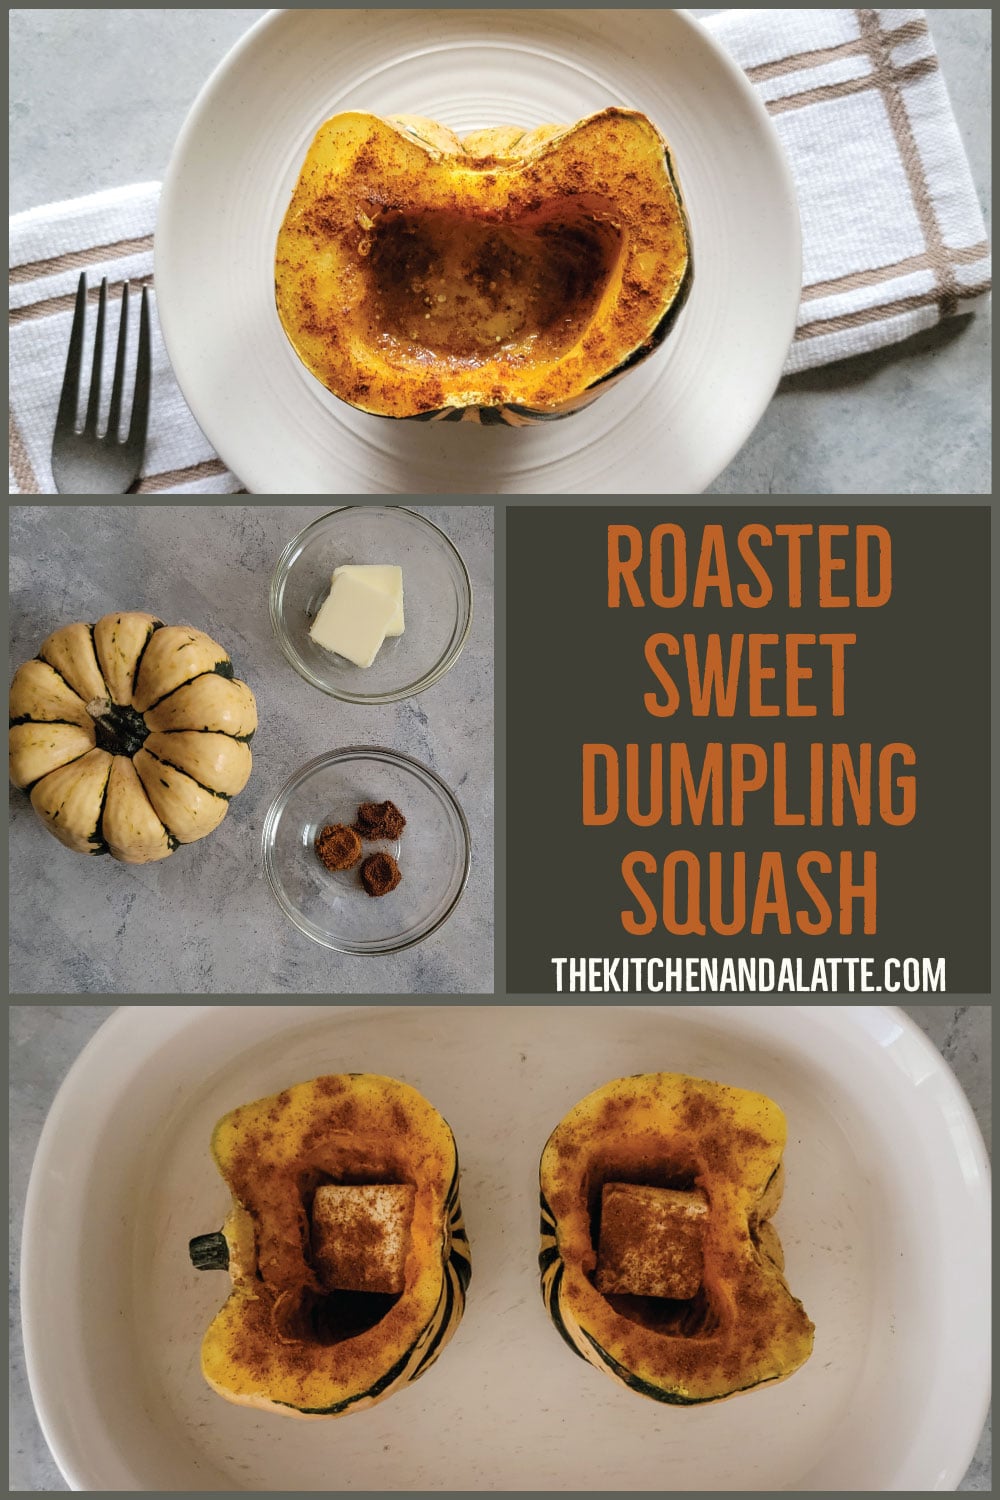 Pinterest graphic - Sweet dumpling squash. 3 pictures. 1 is the ingredients a squash, butter and bowl with seasonings. 2 is the squash on a plate ready to eat with melted butter inside. 3 is the squash in baking dish before baking with butter in the middle and spices on top.